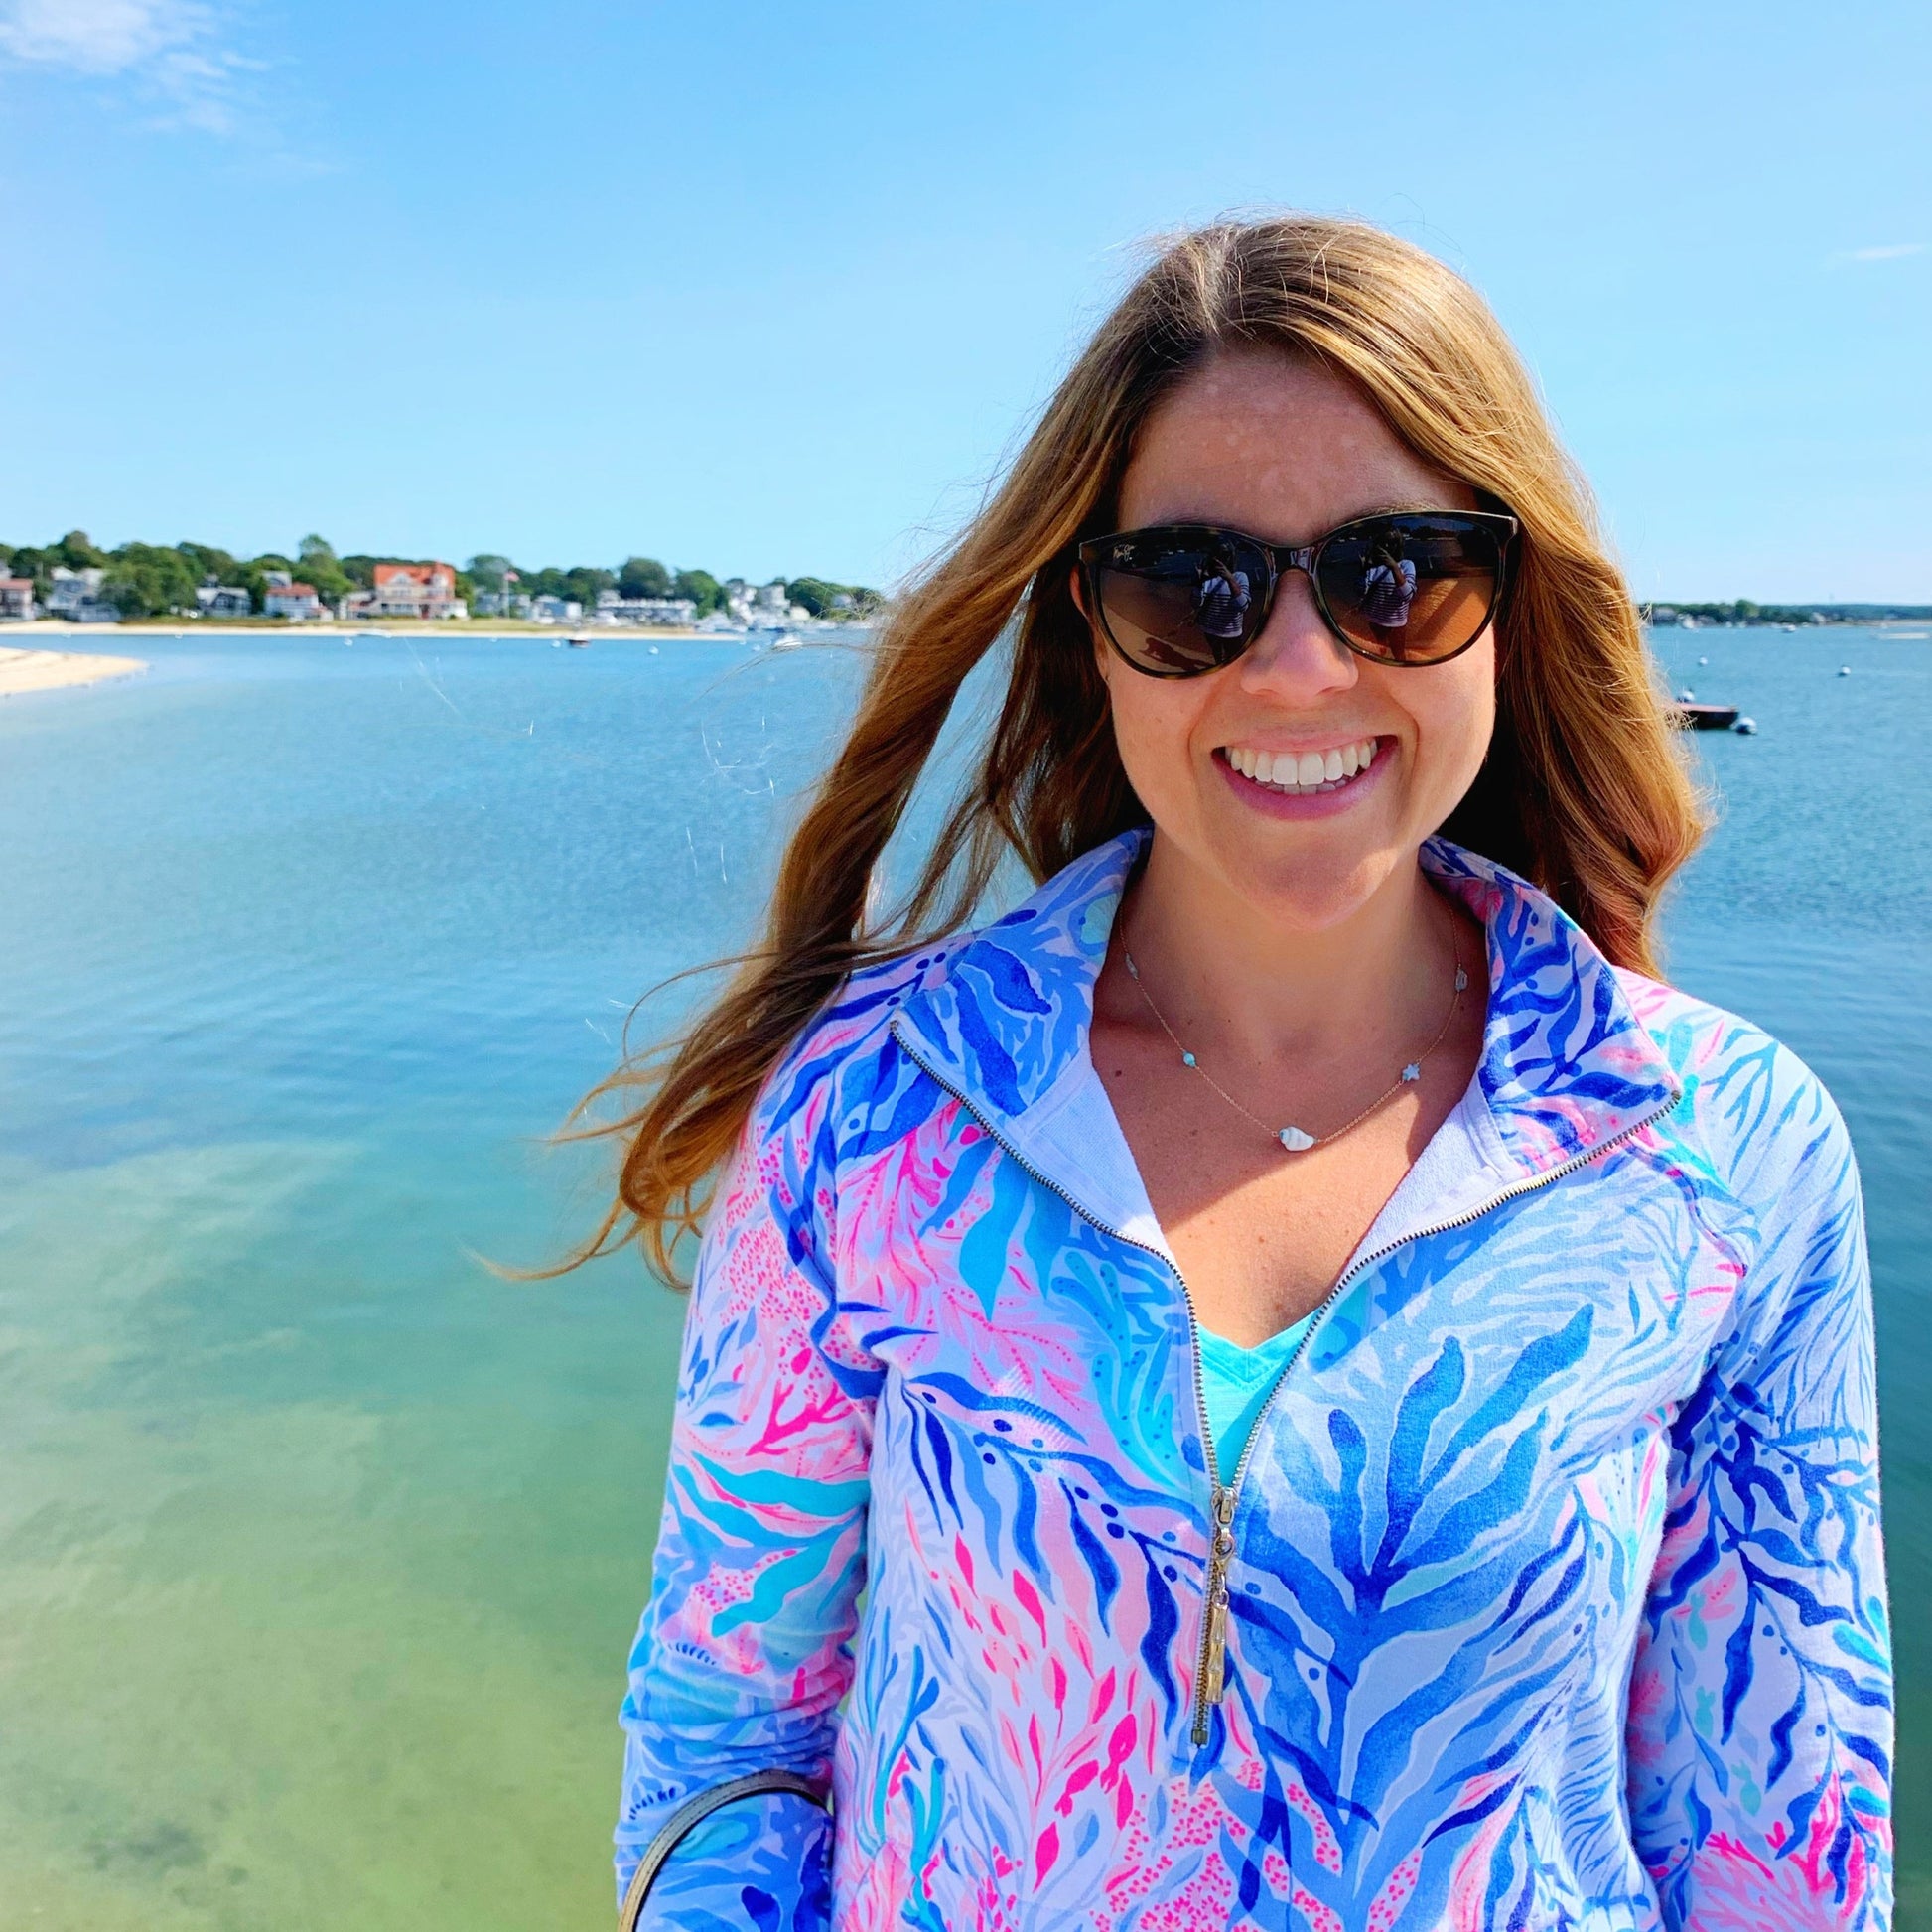 Model dressed in bright lilly pulitzer 3/4 zip up top is wearing the mermaids and madeleines island hopper necklace that is created with semiprecious gems and a shell at the cetner. the model has onset beach behind her